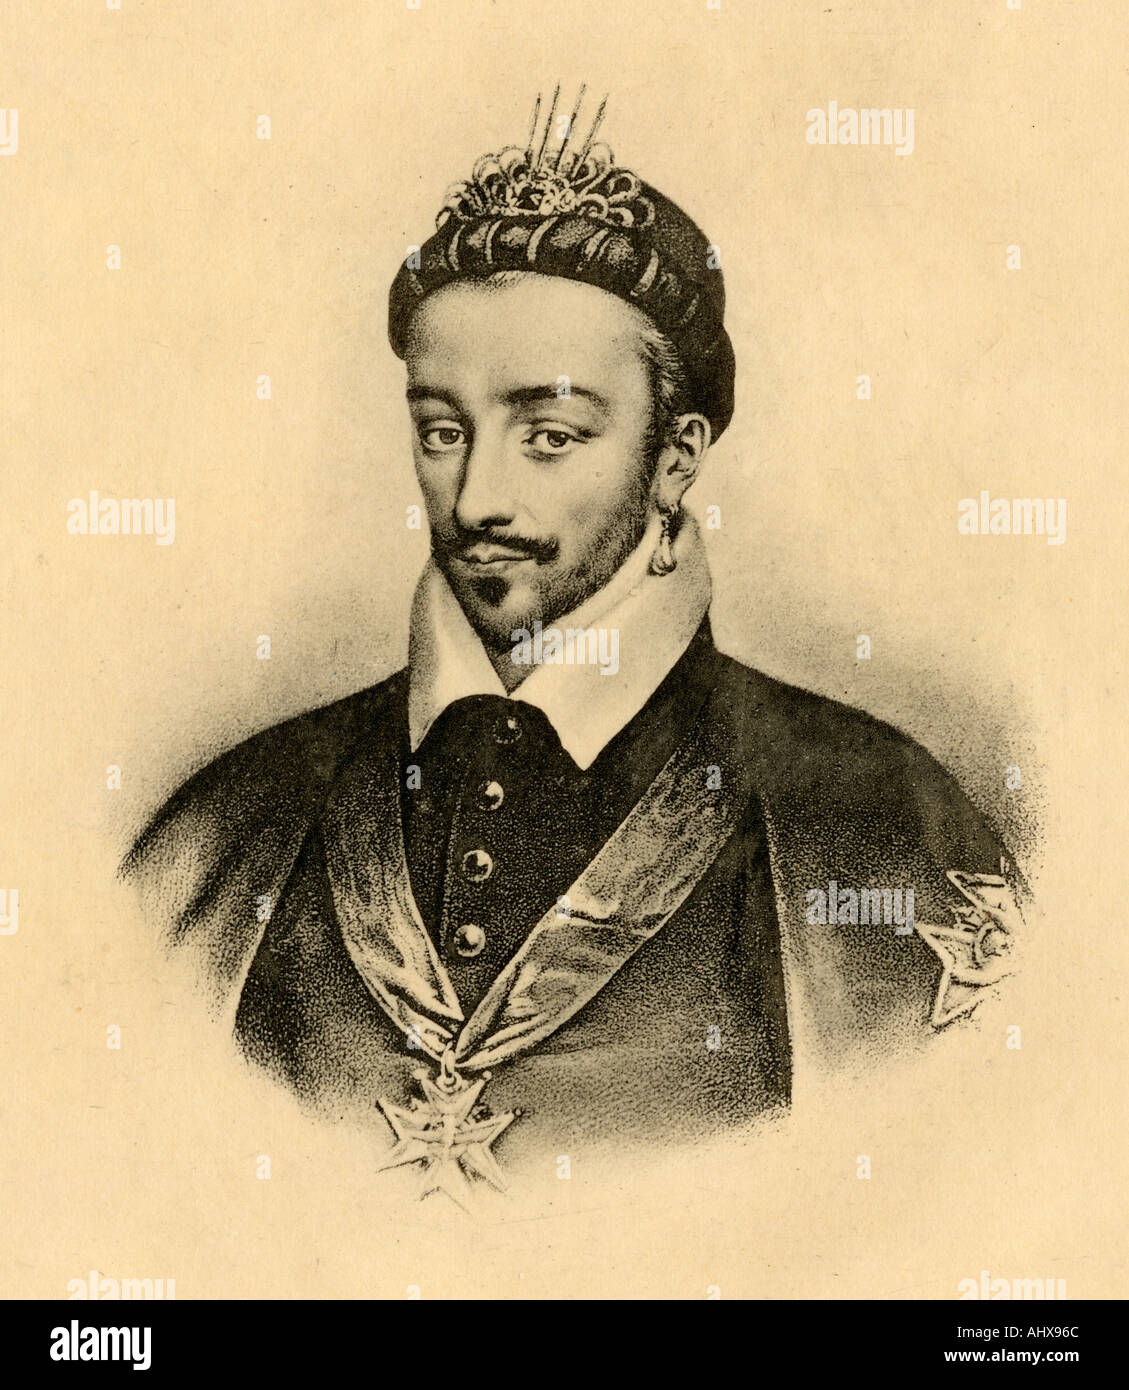 Henry III of France, 1551 - 1589.  King of France, 1574 - 1589 and King of the Polish-Lithuanian Commonwealth, 1573 - 1575. Stock Photo